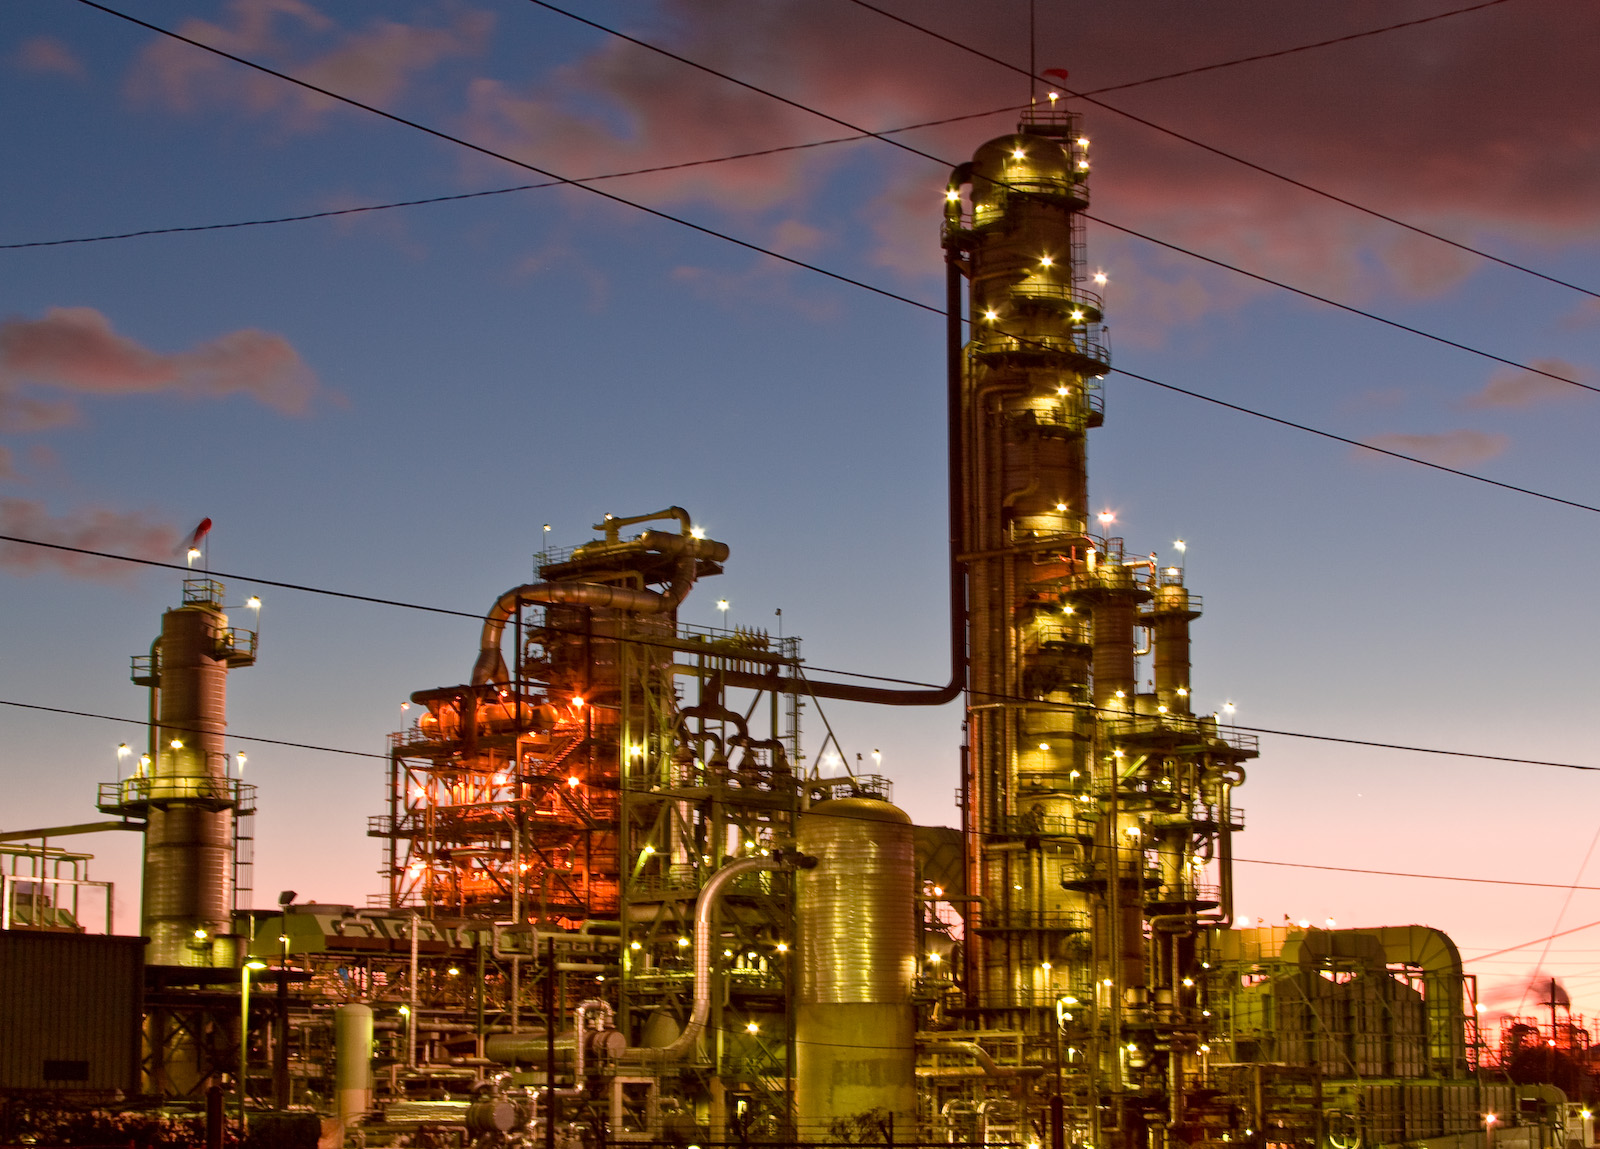 Photograph of the El Segundo Refinery in Westchester, Los Angeles. The photo appears to have been taken at down or dusk. The refinery is lit with many lights. 